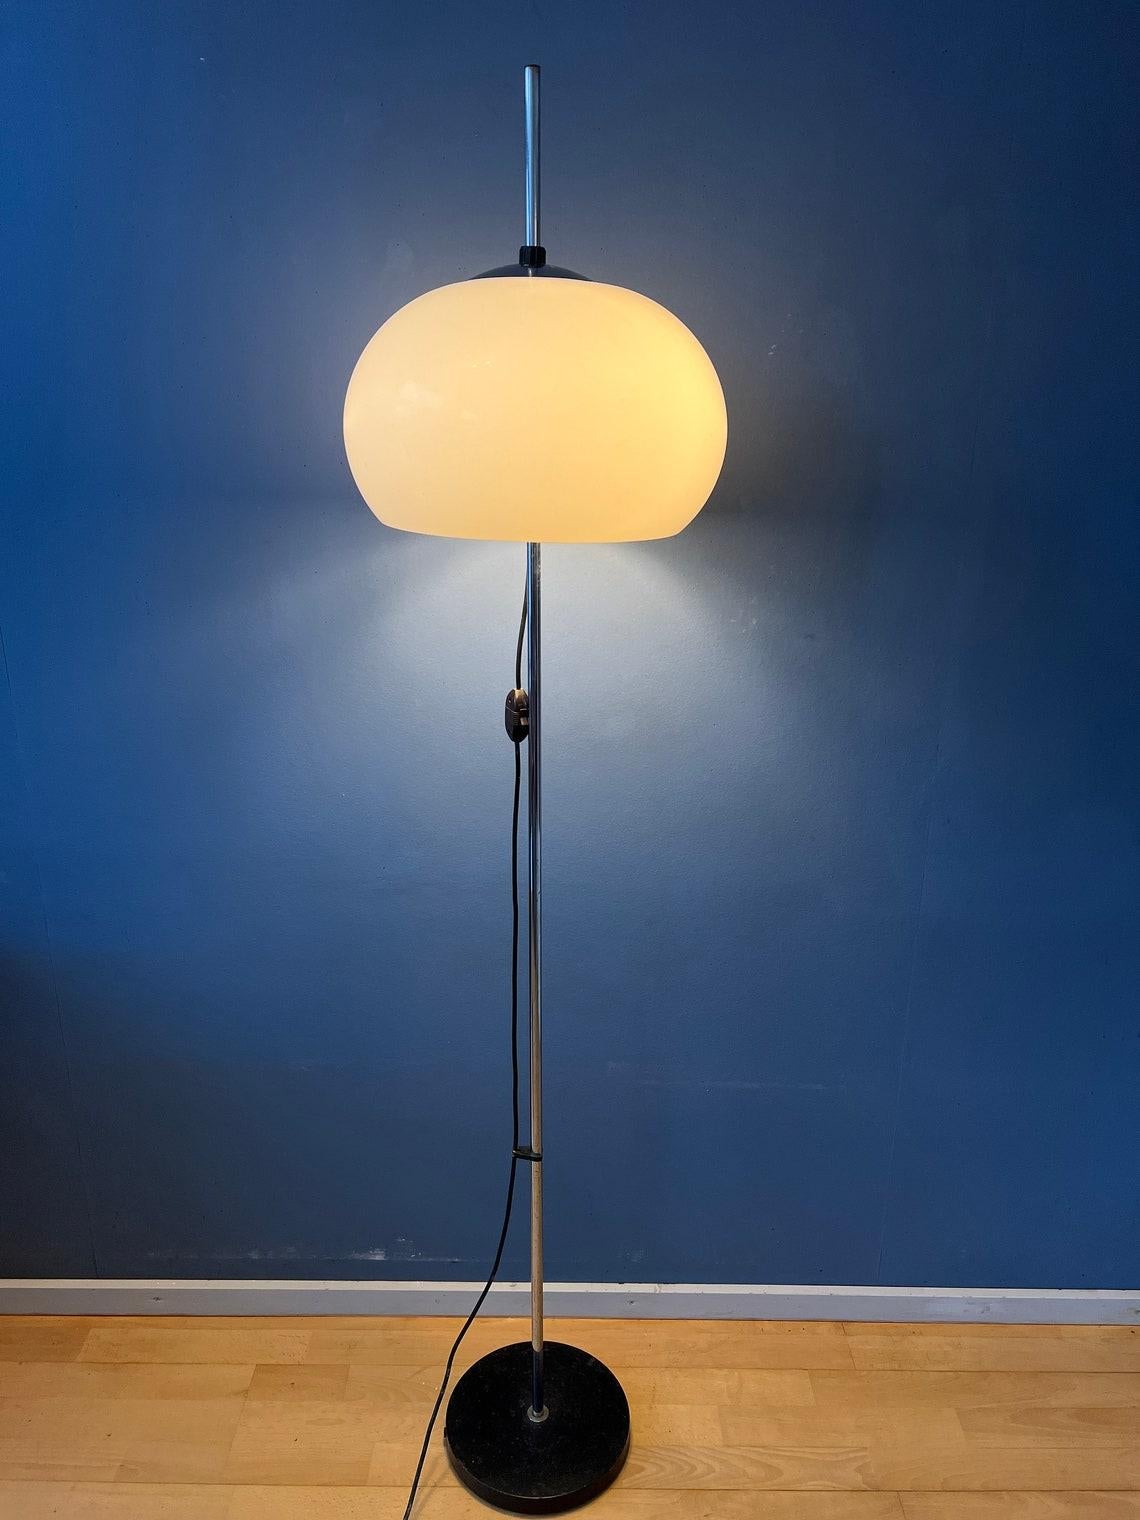 Mid century mushroom floor lamp with white acrylic glass shade. The shade can be moved up and down the base. The lamp requires two E27/26 lightbulbs and currently has a EU-plug.

Additional information:
Materials: Metal, plastic
Period: